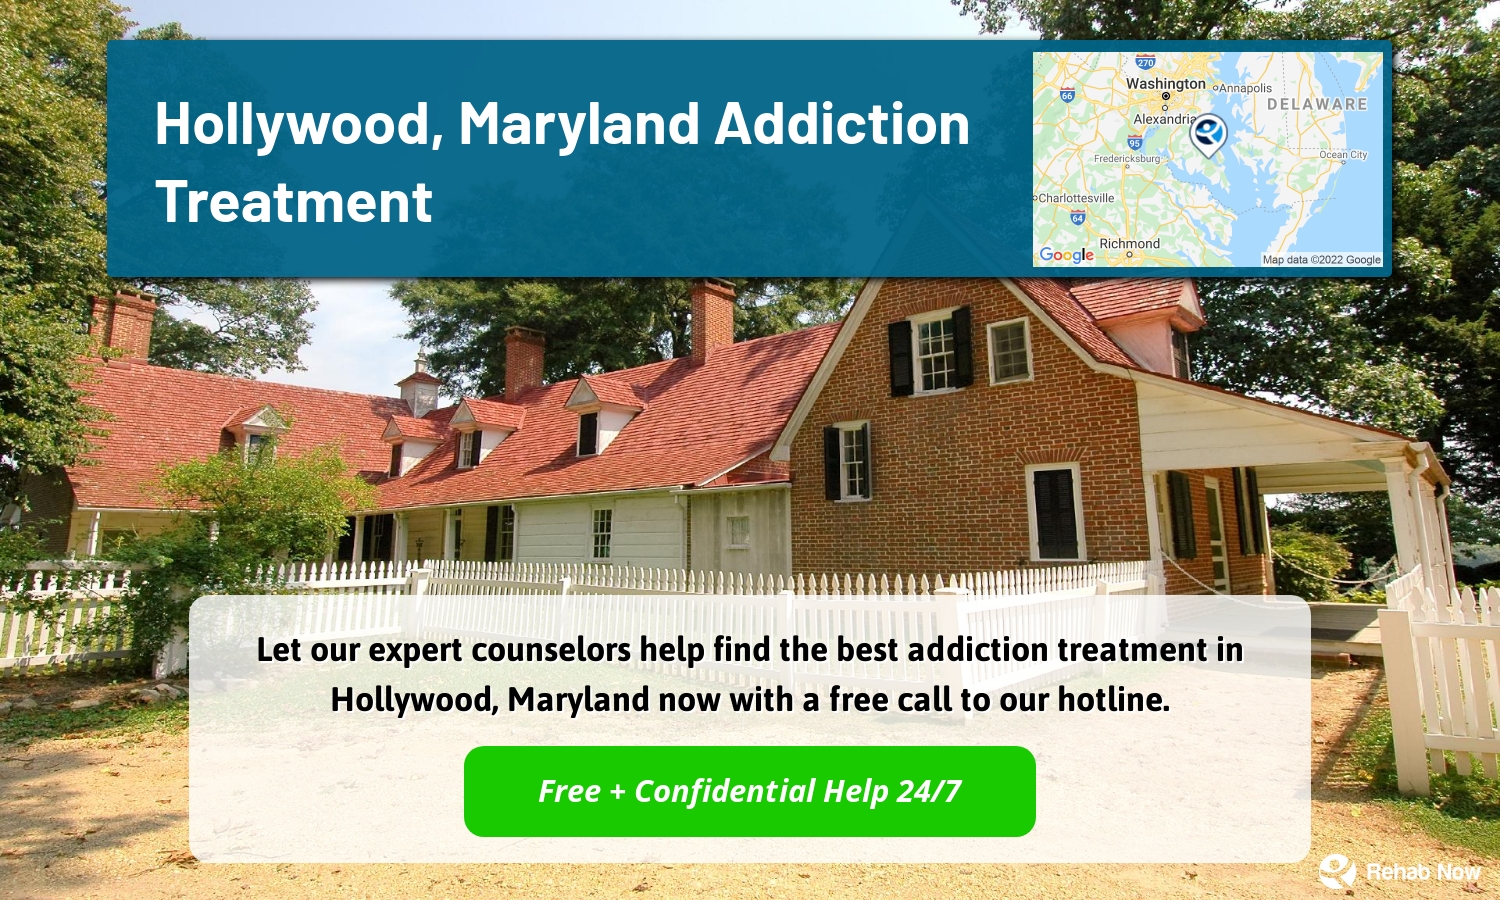 Let our expert counselors help find the best addiction treatment in Hollywood, Maryland now with a free call to our hotline.